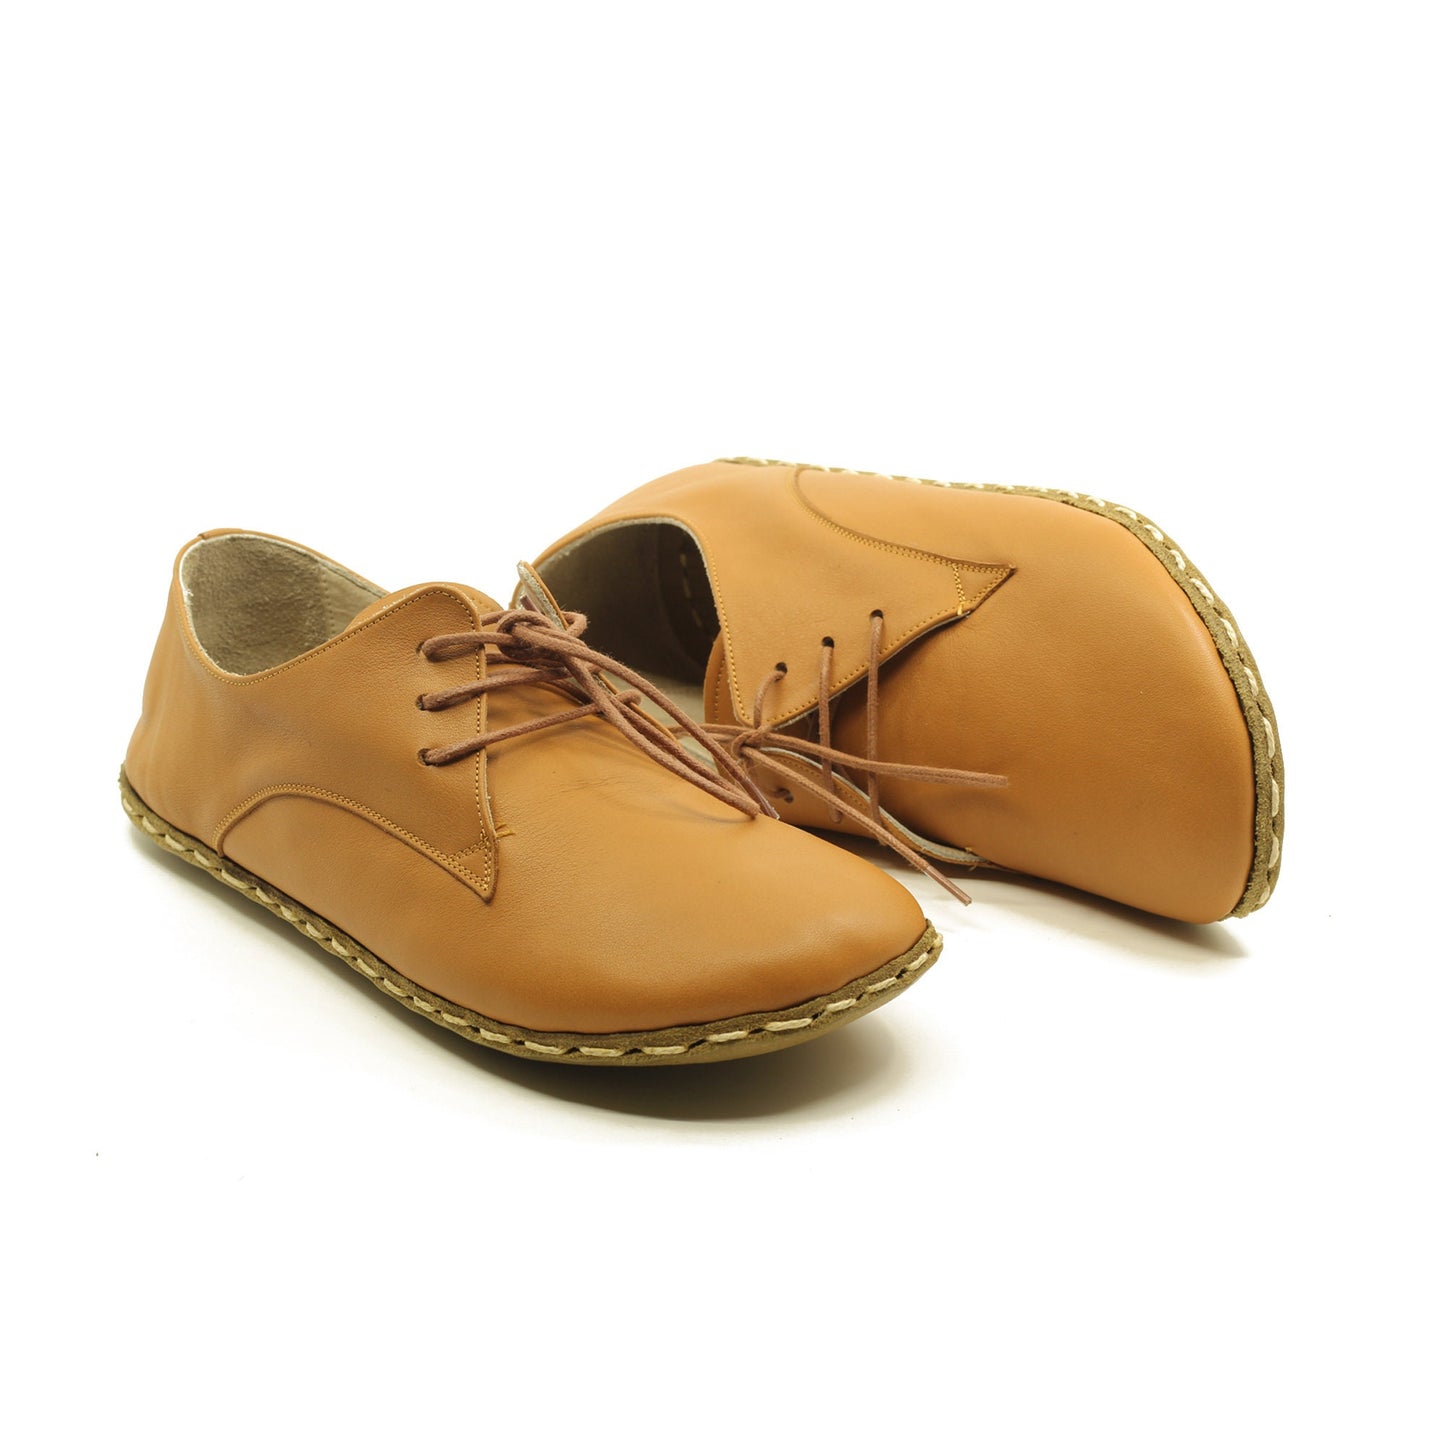 Men's Light Brown Barefoot Leather Shoes - Nefes